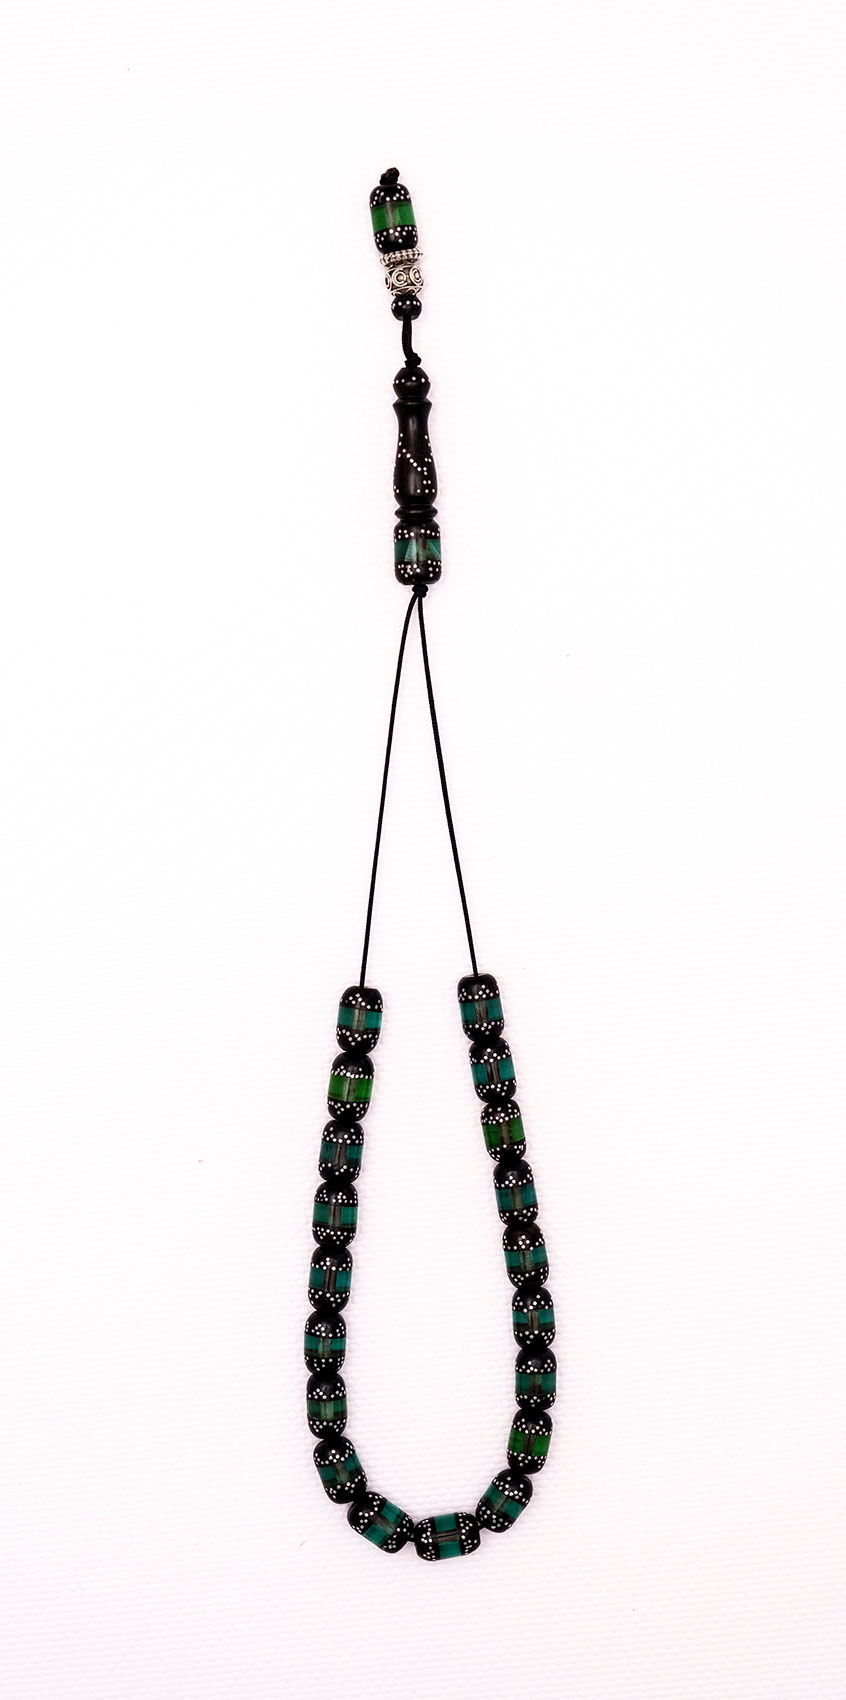 Ebony with artificial resin and silver (green).